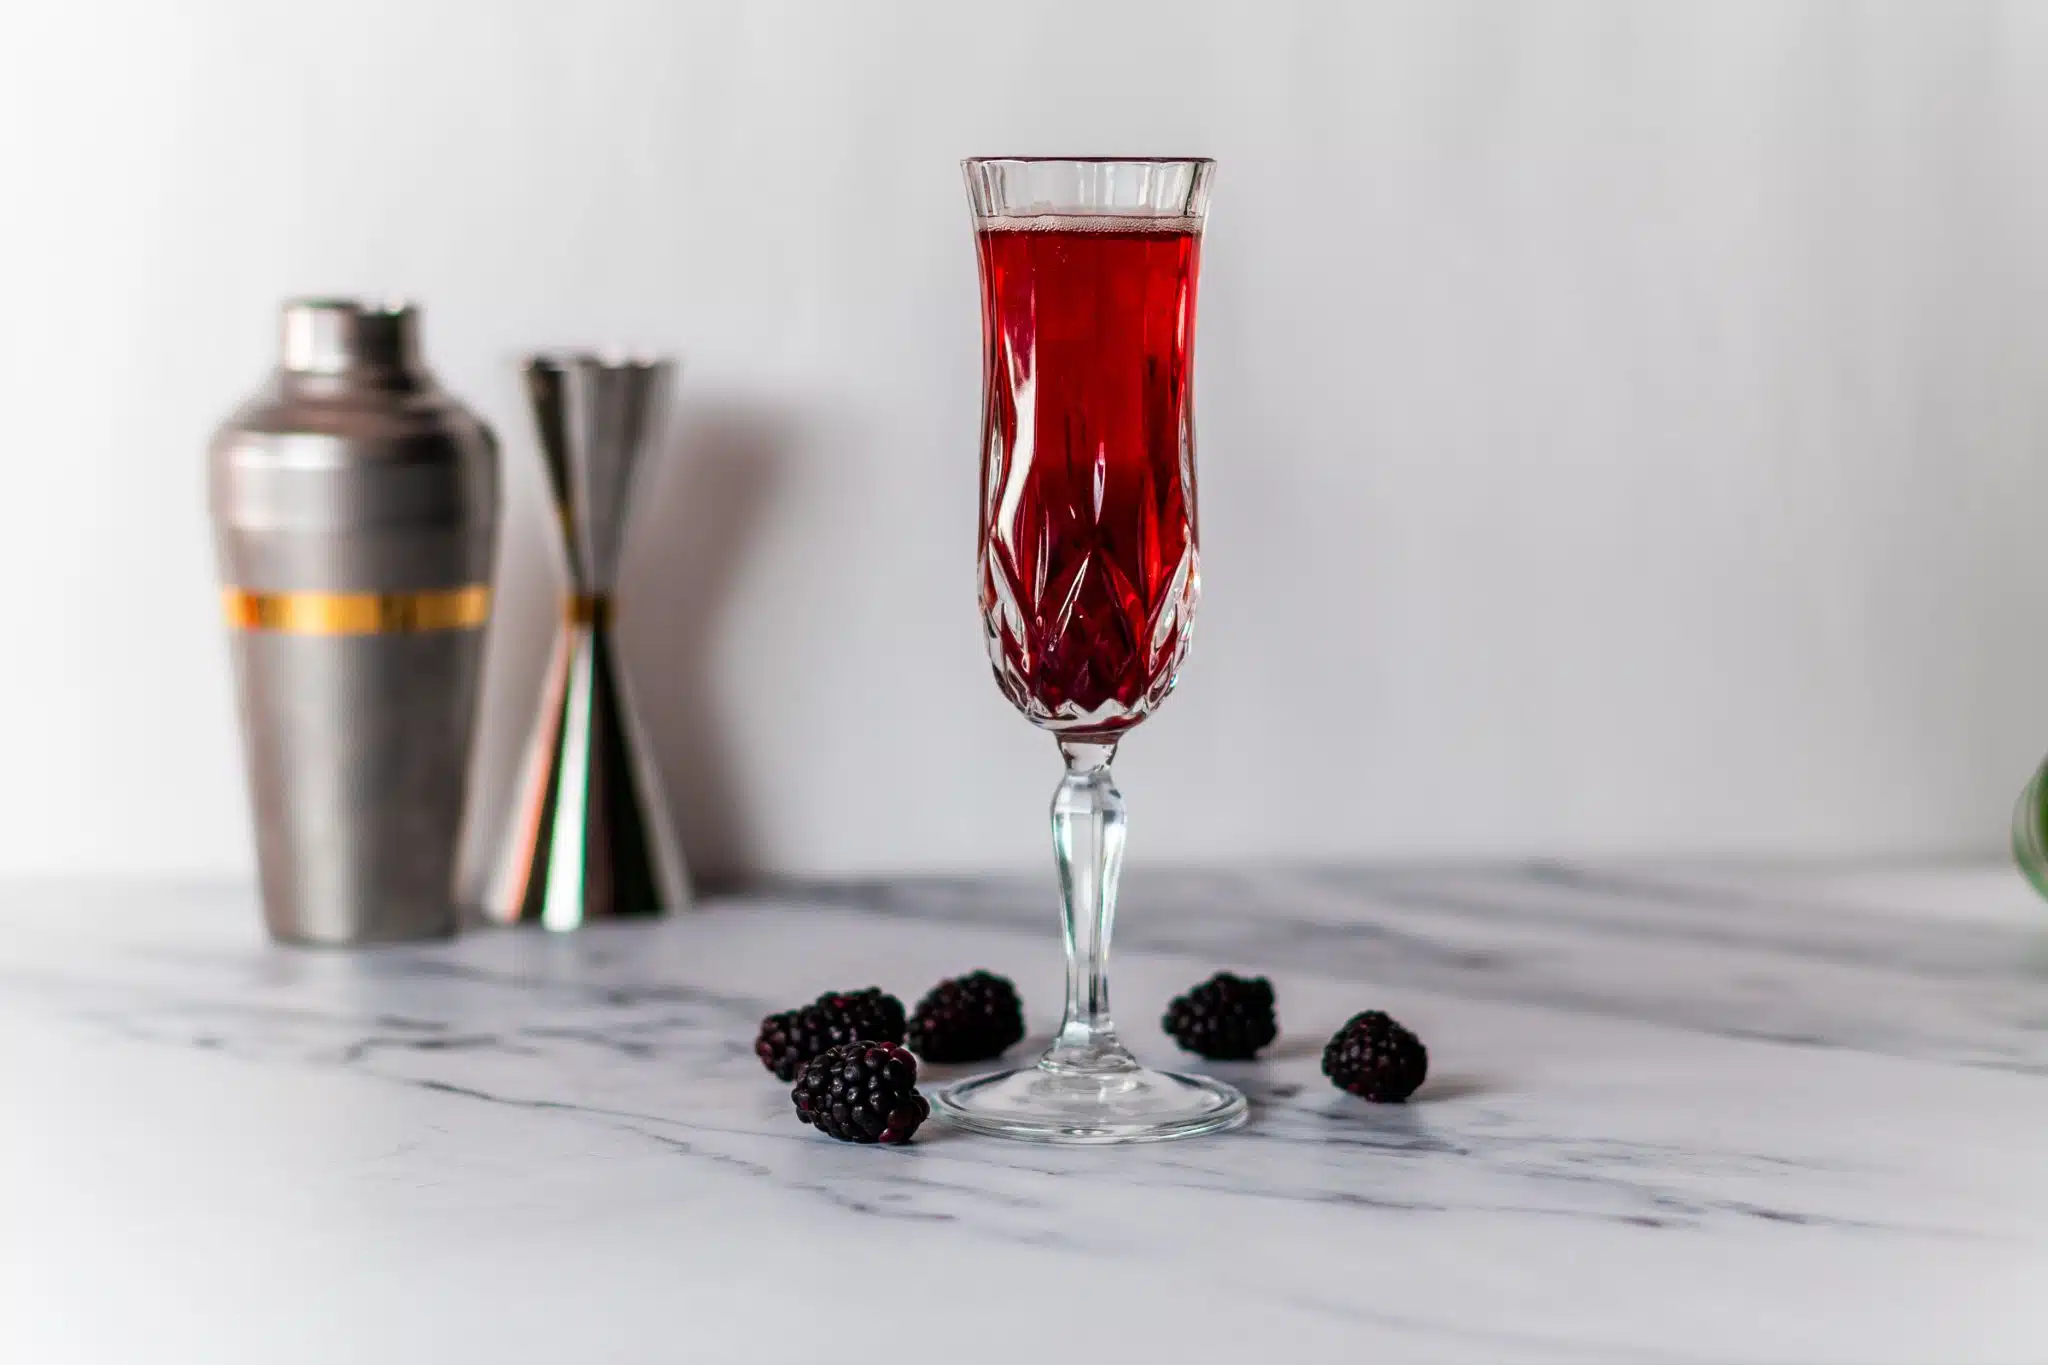 A side shot of a Kir Royale cocktail in a champagne flute on a white marmol table surrounded by berries and a shaker and a jigger on the background